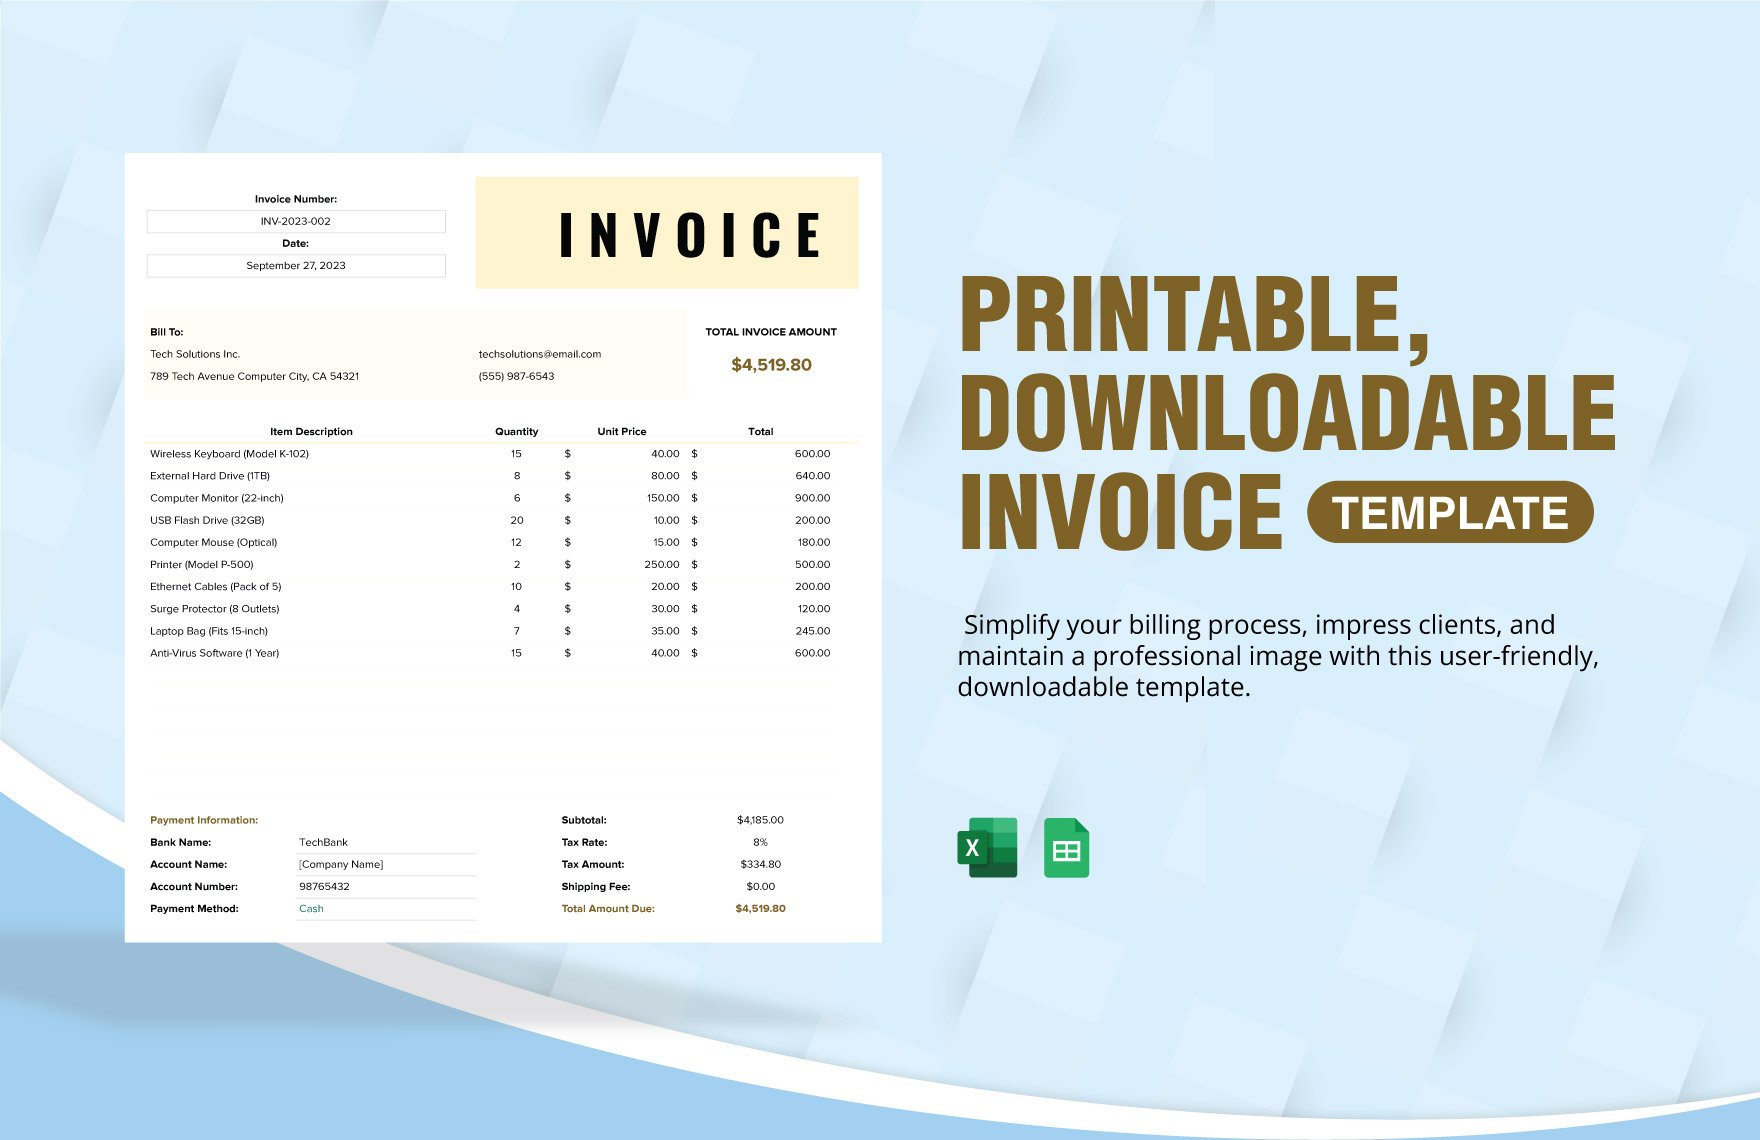 Free Printable, Downloadable Invoice Template in Excel, Google Sheets